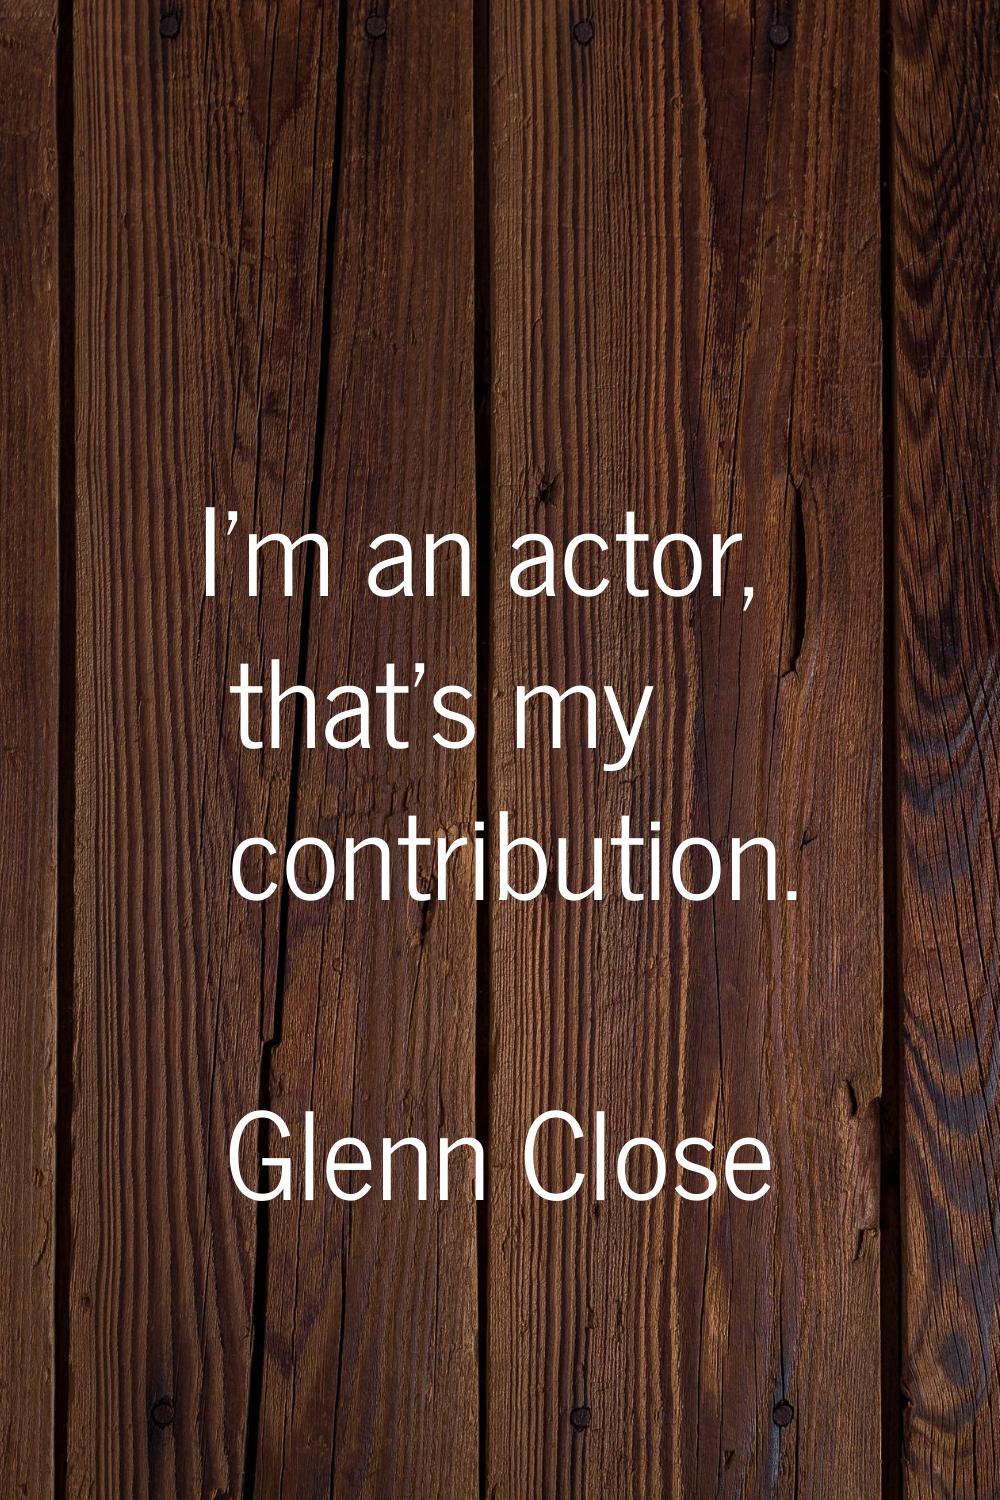 I'm an actor, that's my contribution.